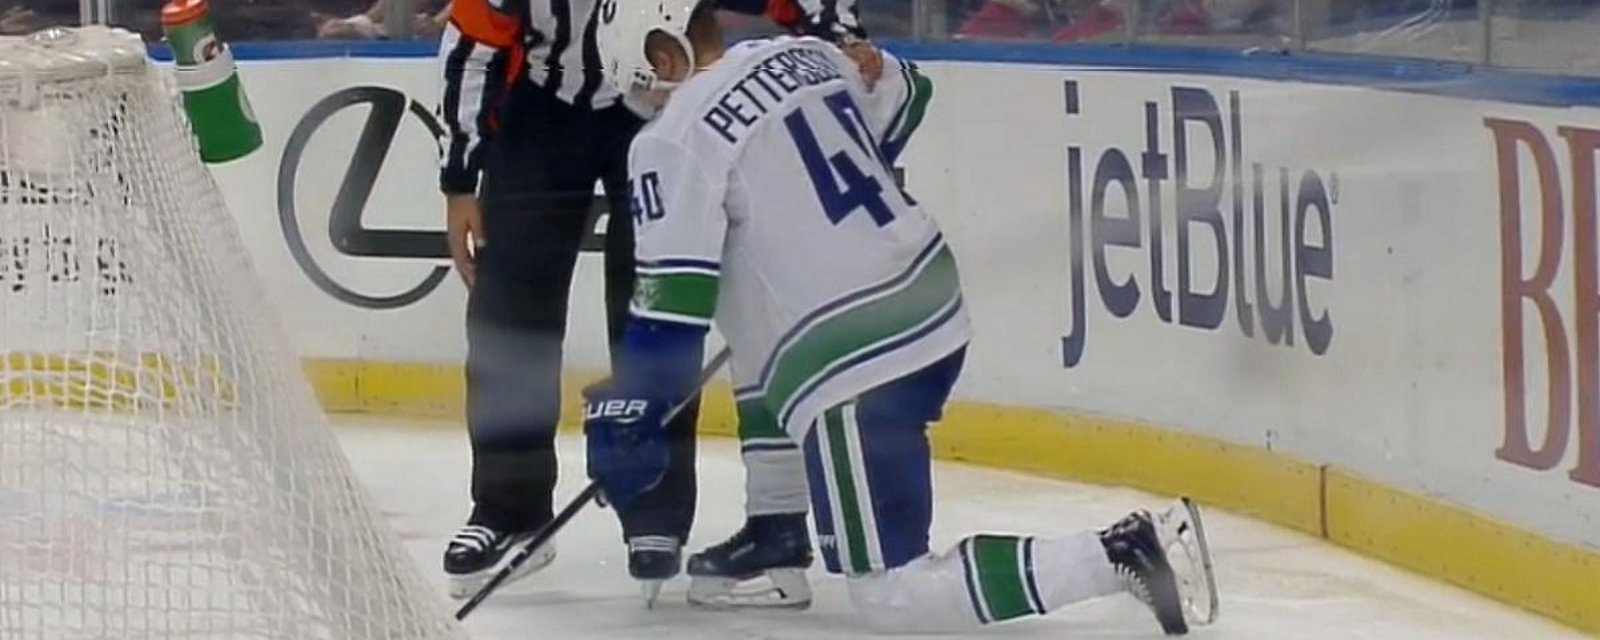 Petterson knocked out of the game after being slammed to the ice.